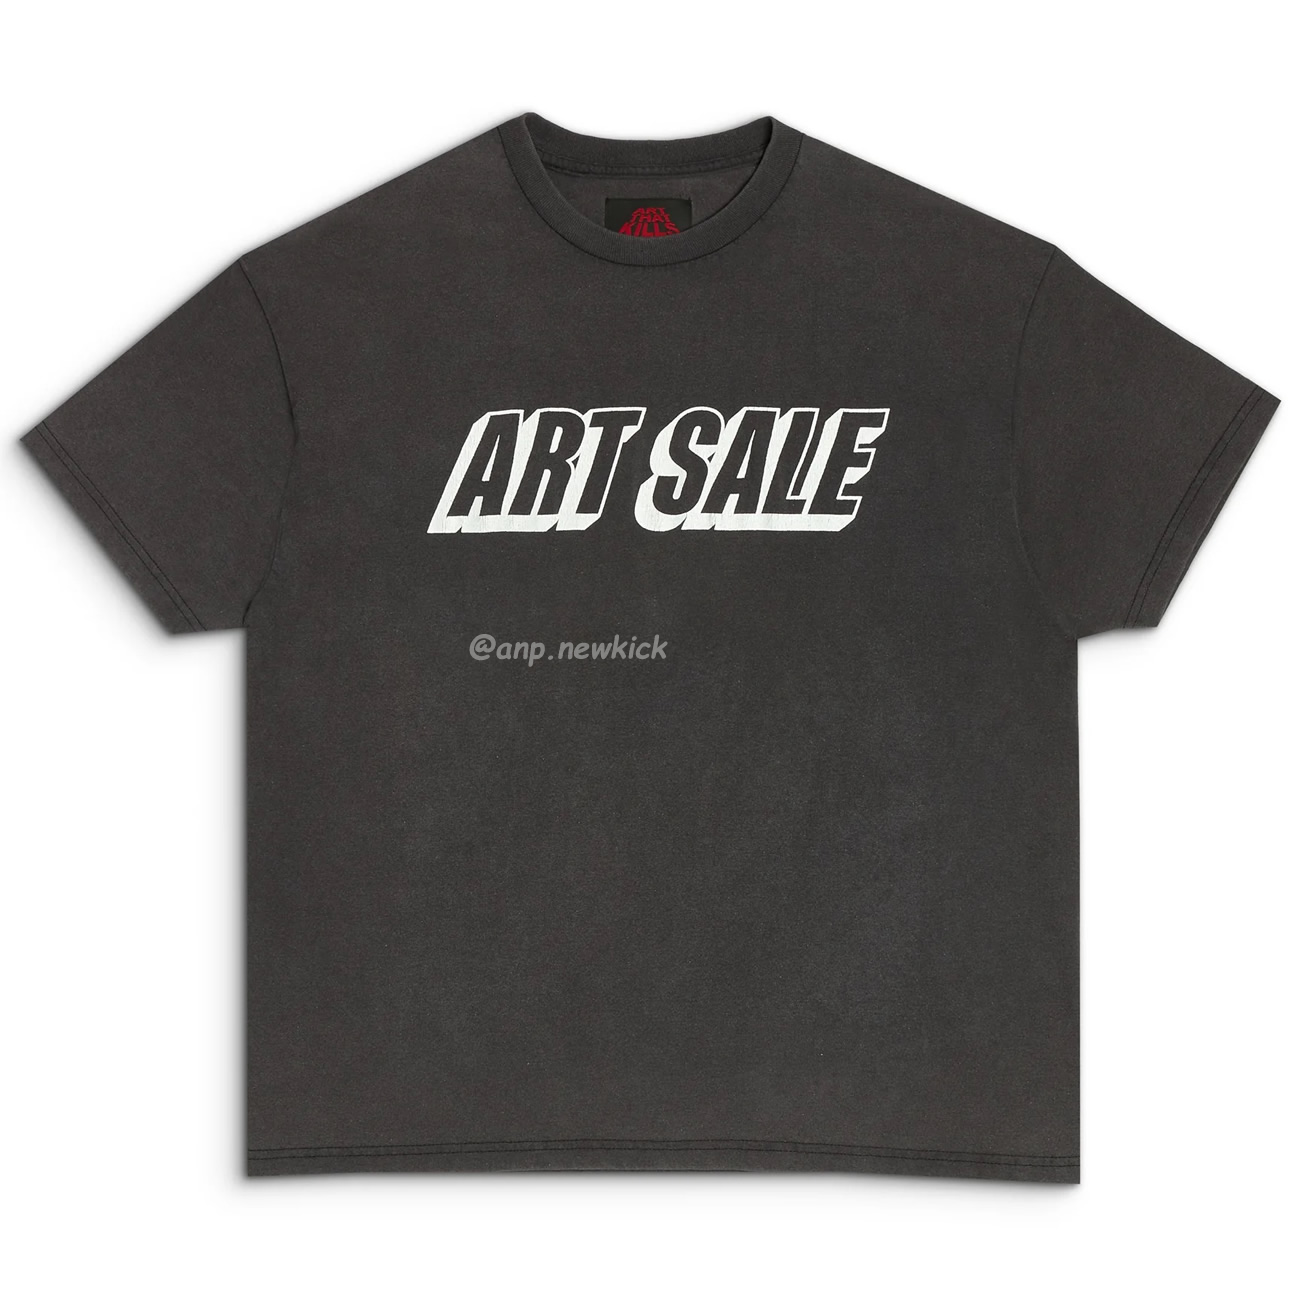 Gallery Dept Music Lives On Atk Tee Art Design Exclusive Retro Distressed Washed Short Sleeve T Shirt (6) - newkick.org